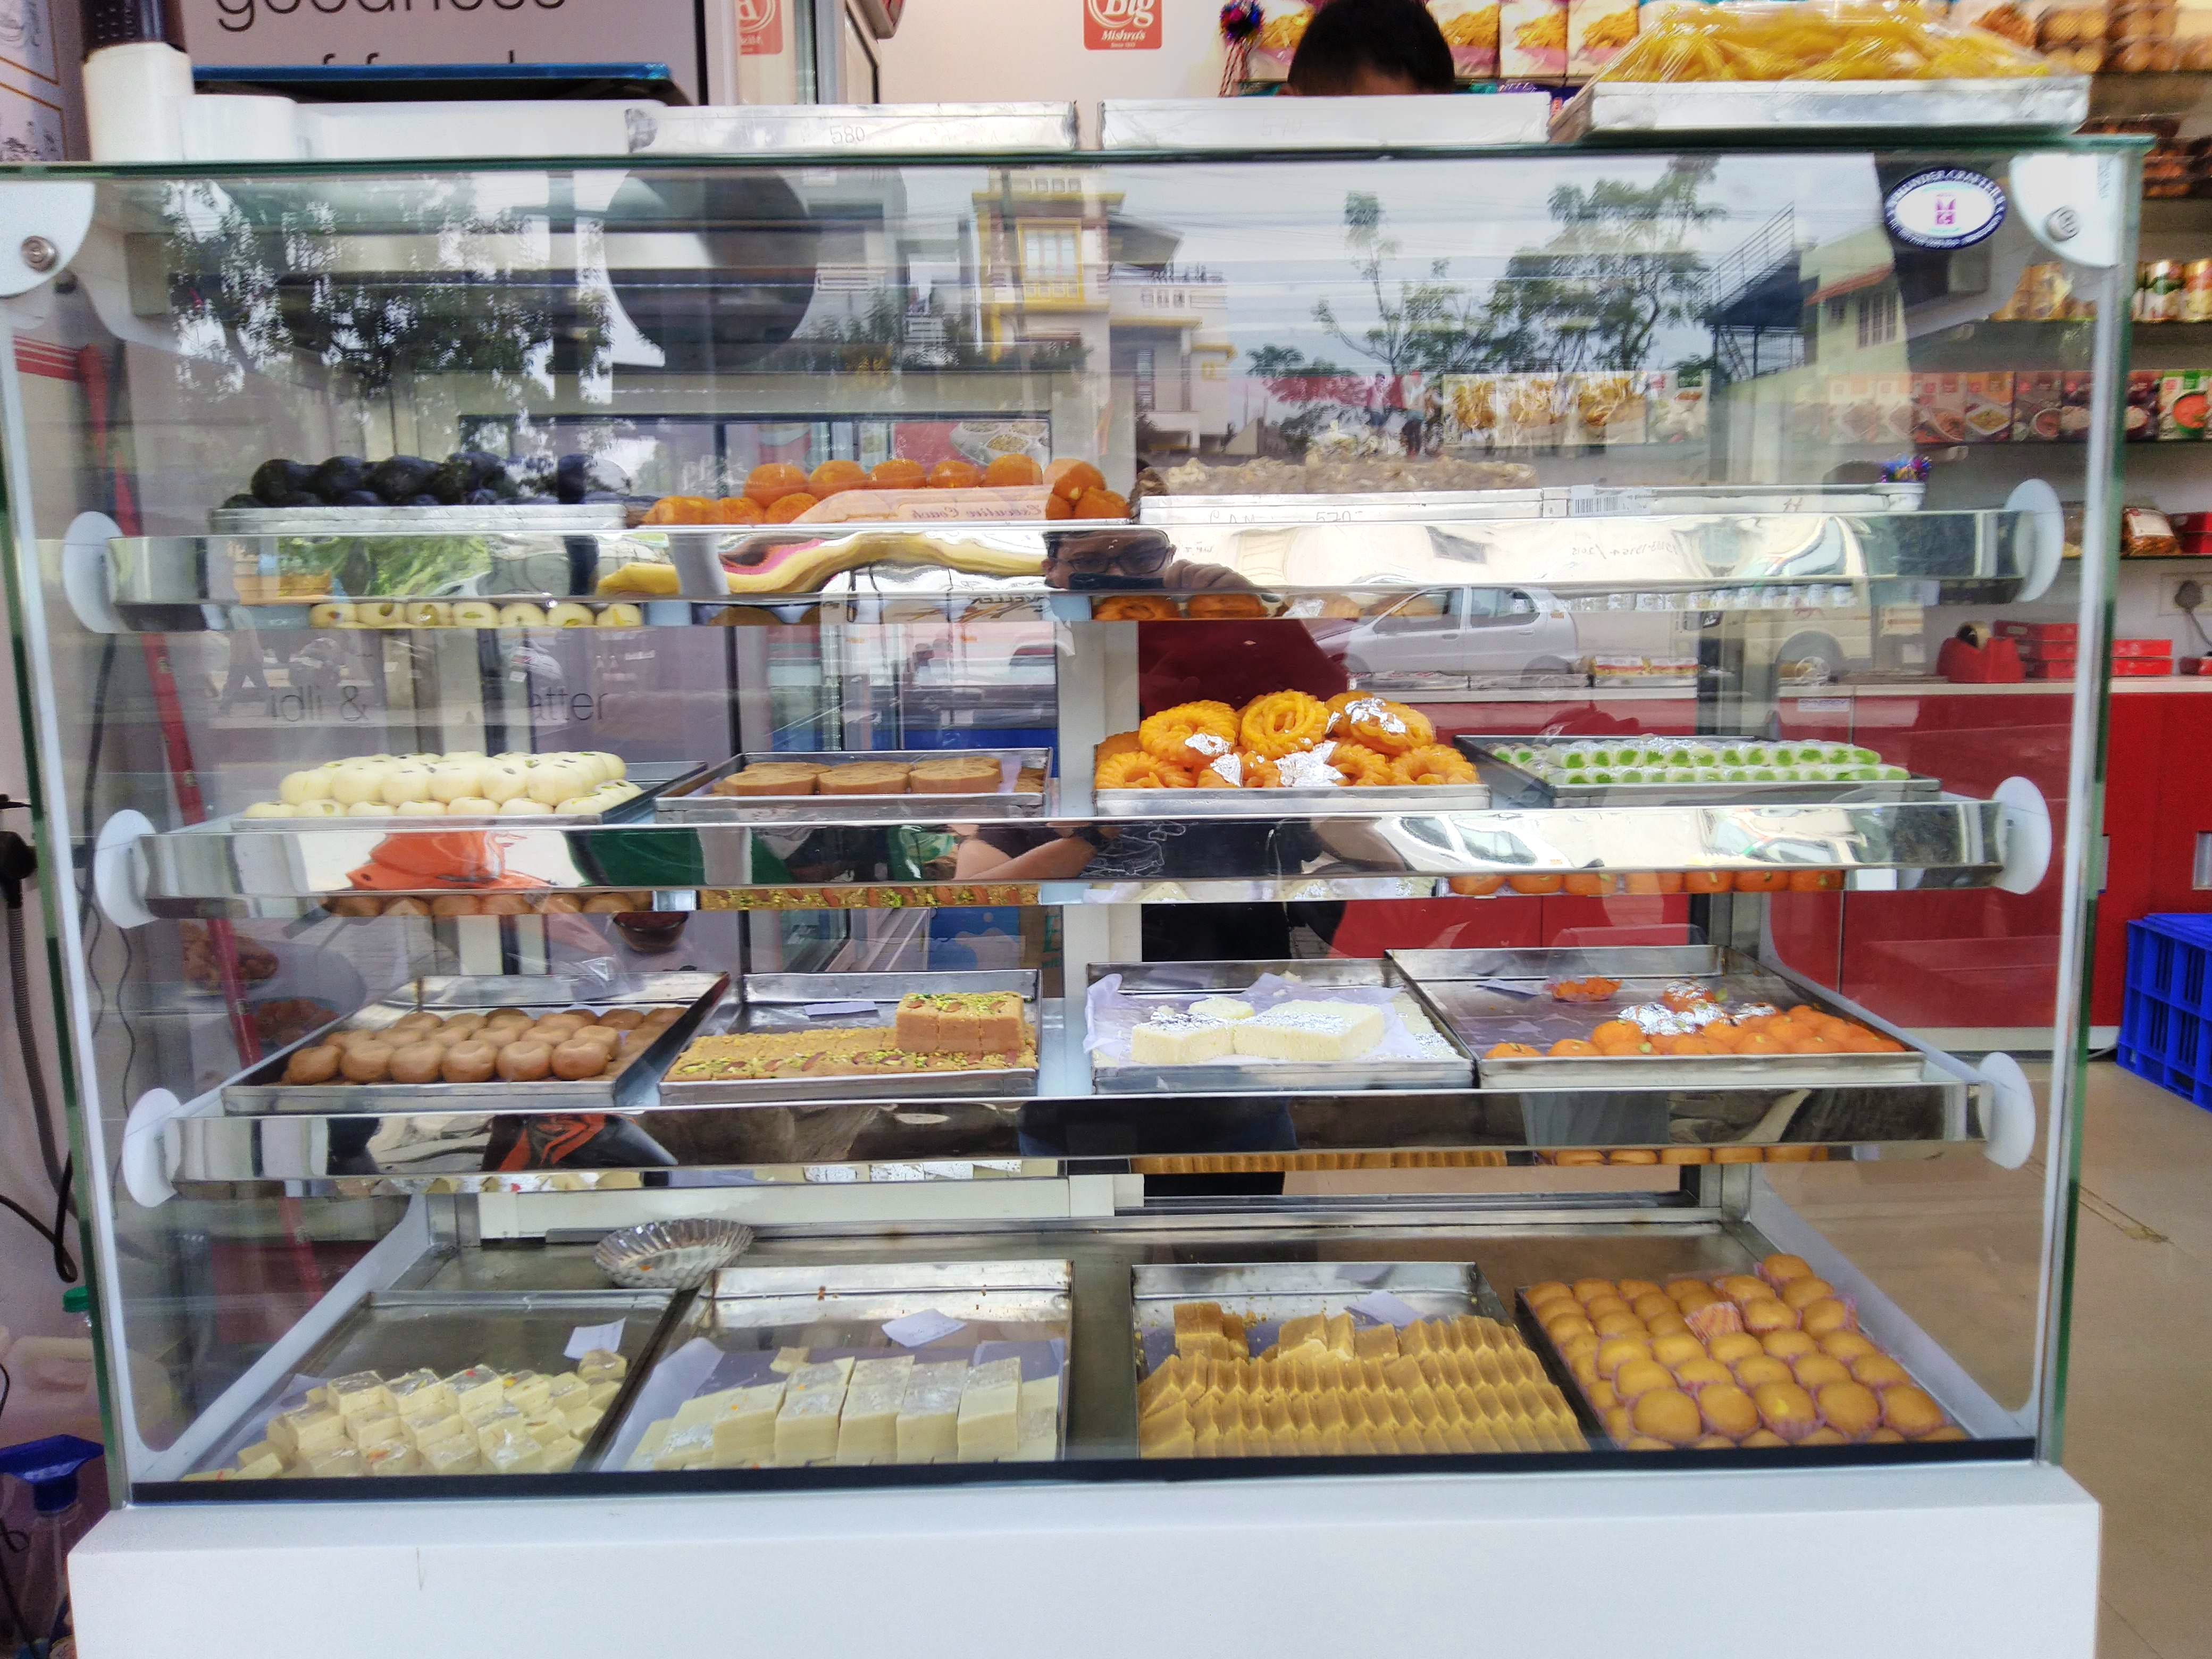 Bakery,Display case,Pâtisserie,Delicatessen,Food,Pastry,Business,Frozen food,Convenience food,Grocery store